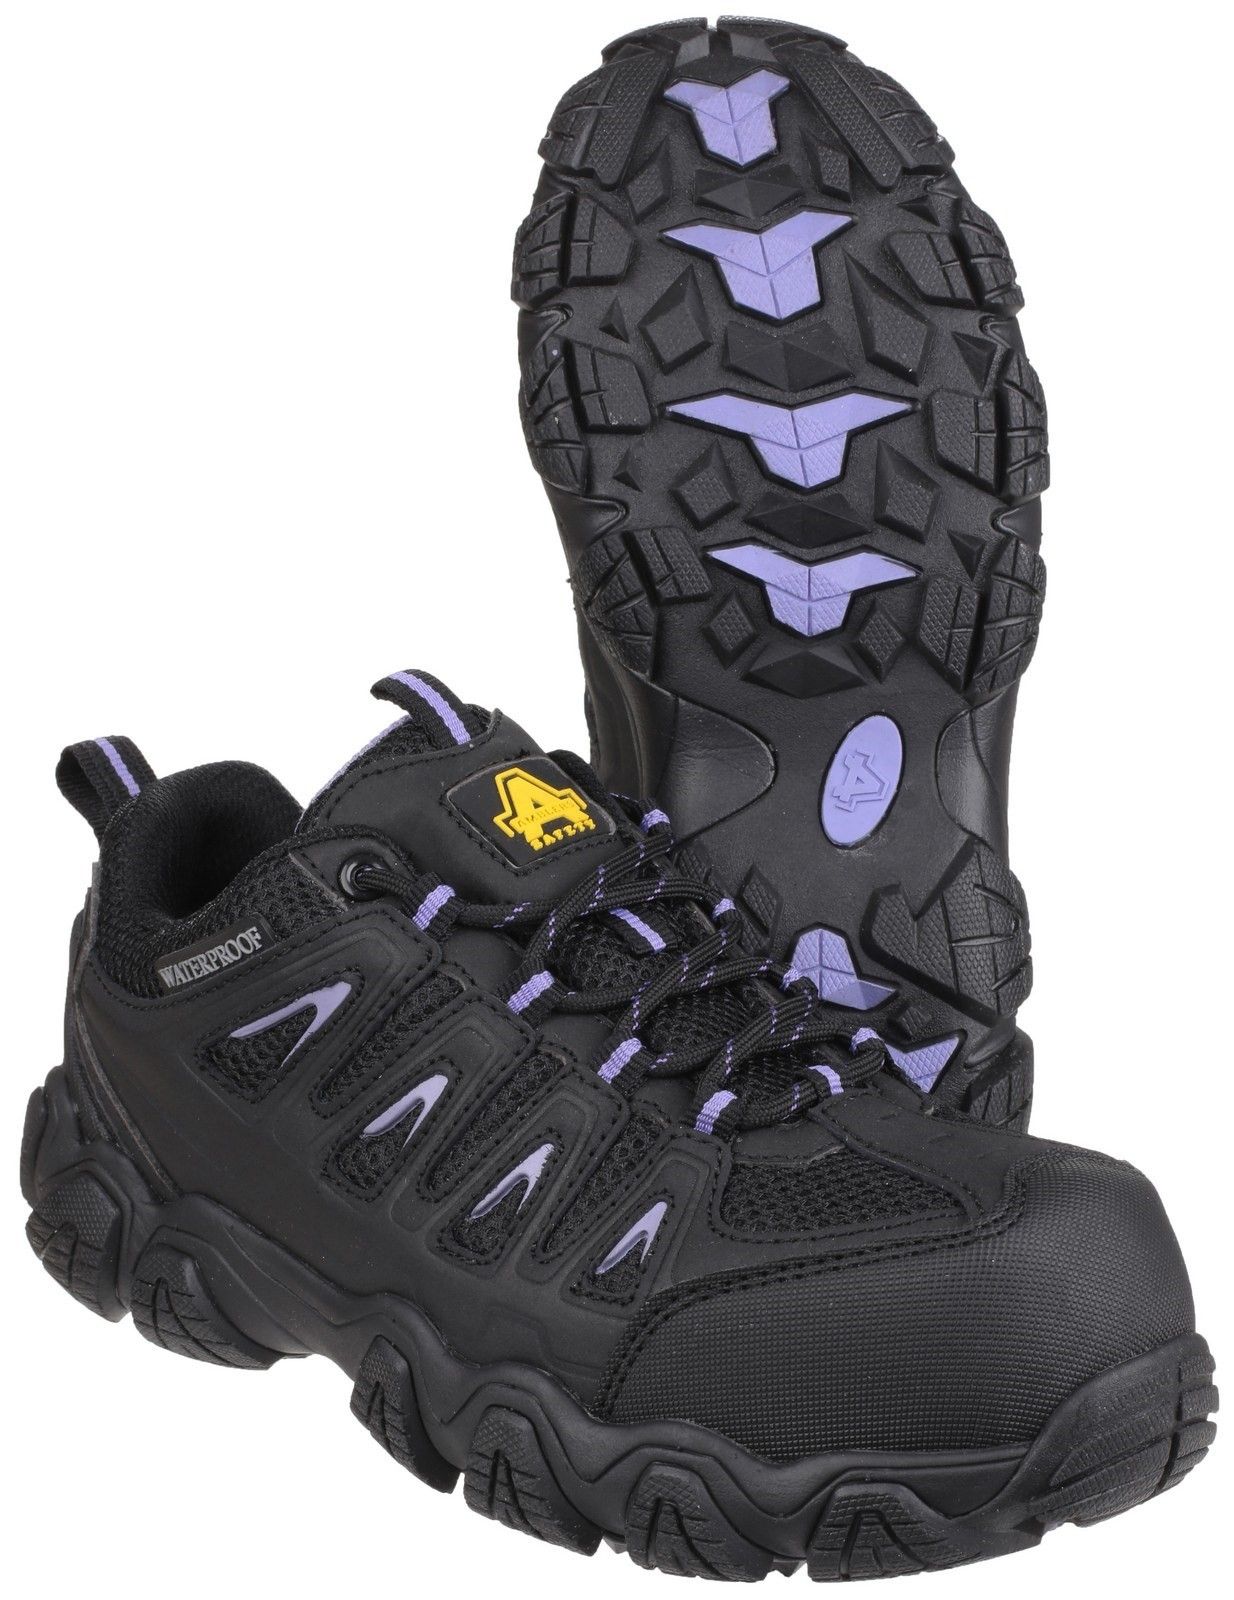 Ladies non-metal waterproof safety trainer featuring memory foam footbed and hardwearing EVA/Rubber outsole.200 Joules composite toe cap. 
Non-metallic, anti-penetration midsole. 
Water resistant leather & mesh upper. 
Breathable waterproof membrane and mesh lining. 
Padded collar & padded bellowed tongue.